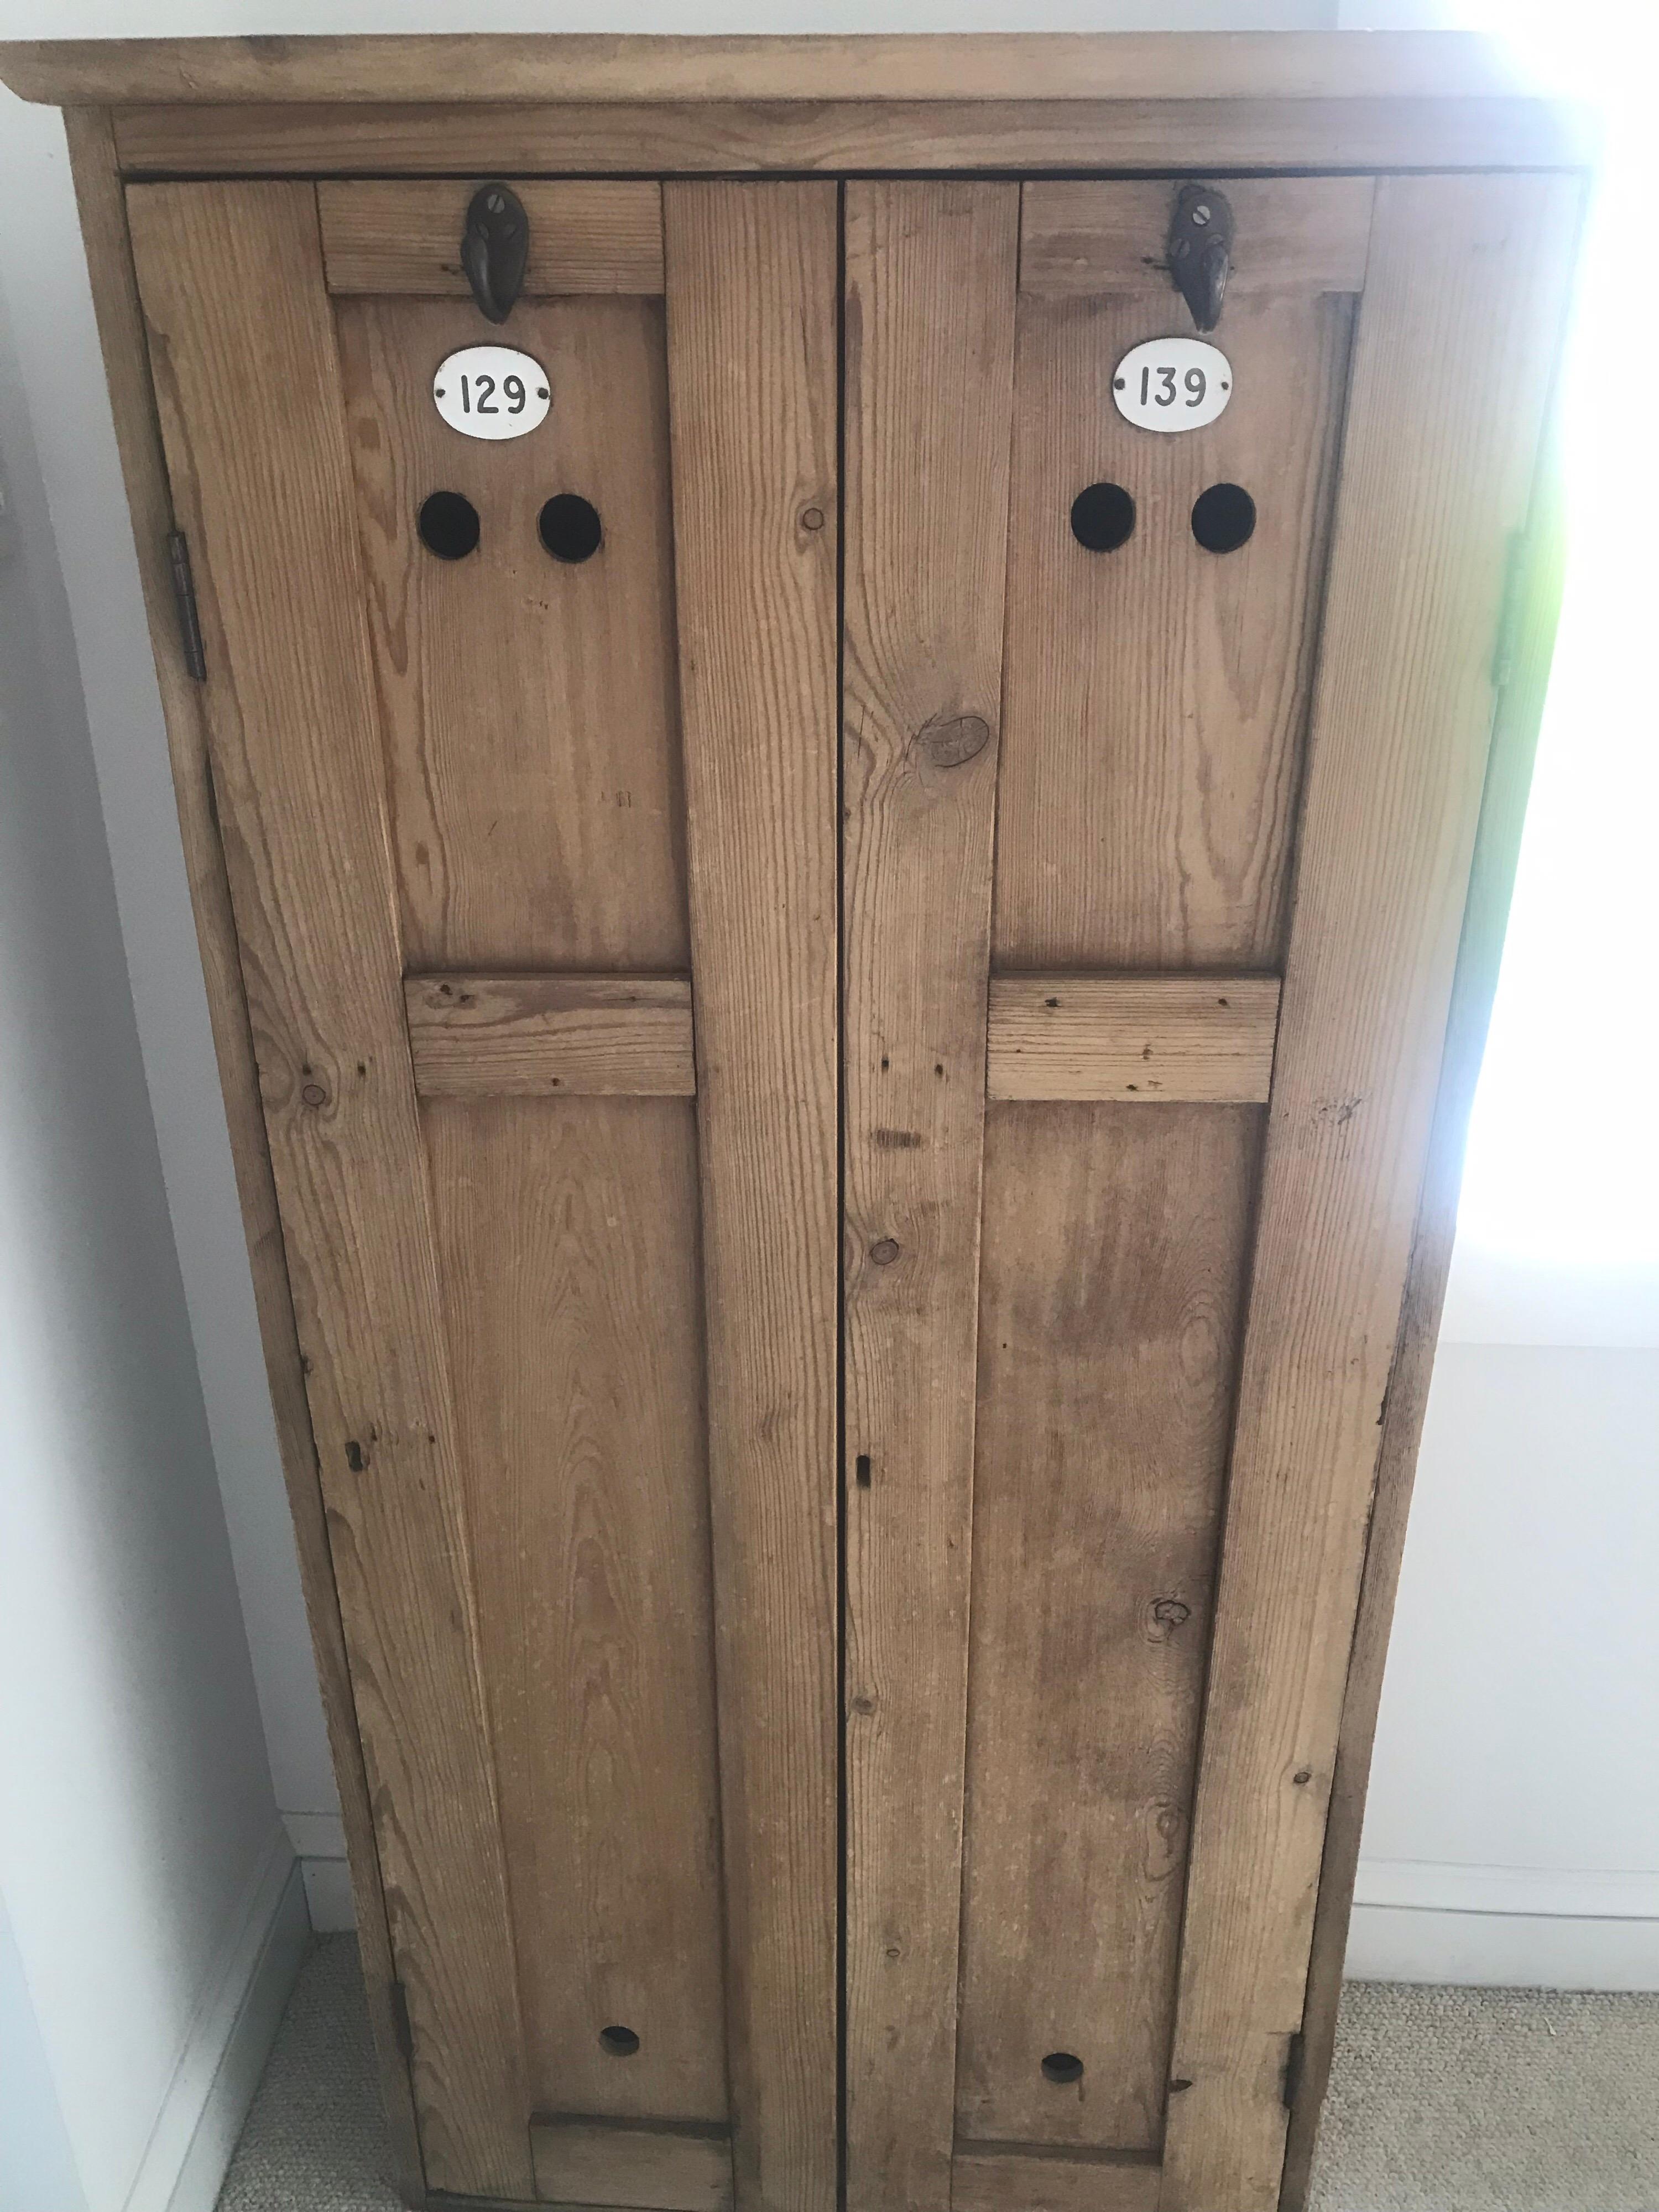 Two joined lockers with both internal and external hooks are ideal for anywhere that organization or additional storage would be helpful. The numbered lockers, in pine, lend a country casual feeling to a mudroom, hallway or children’s room.